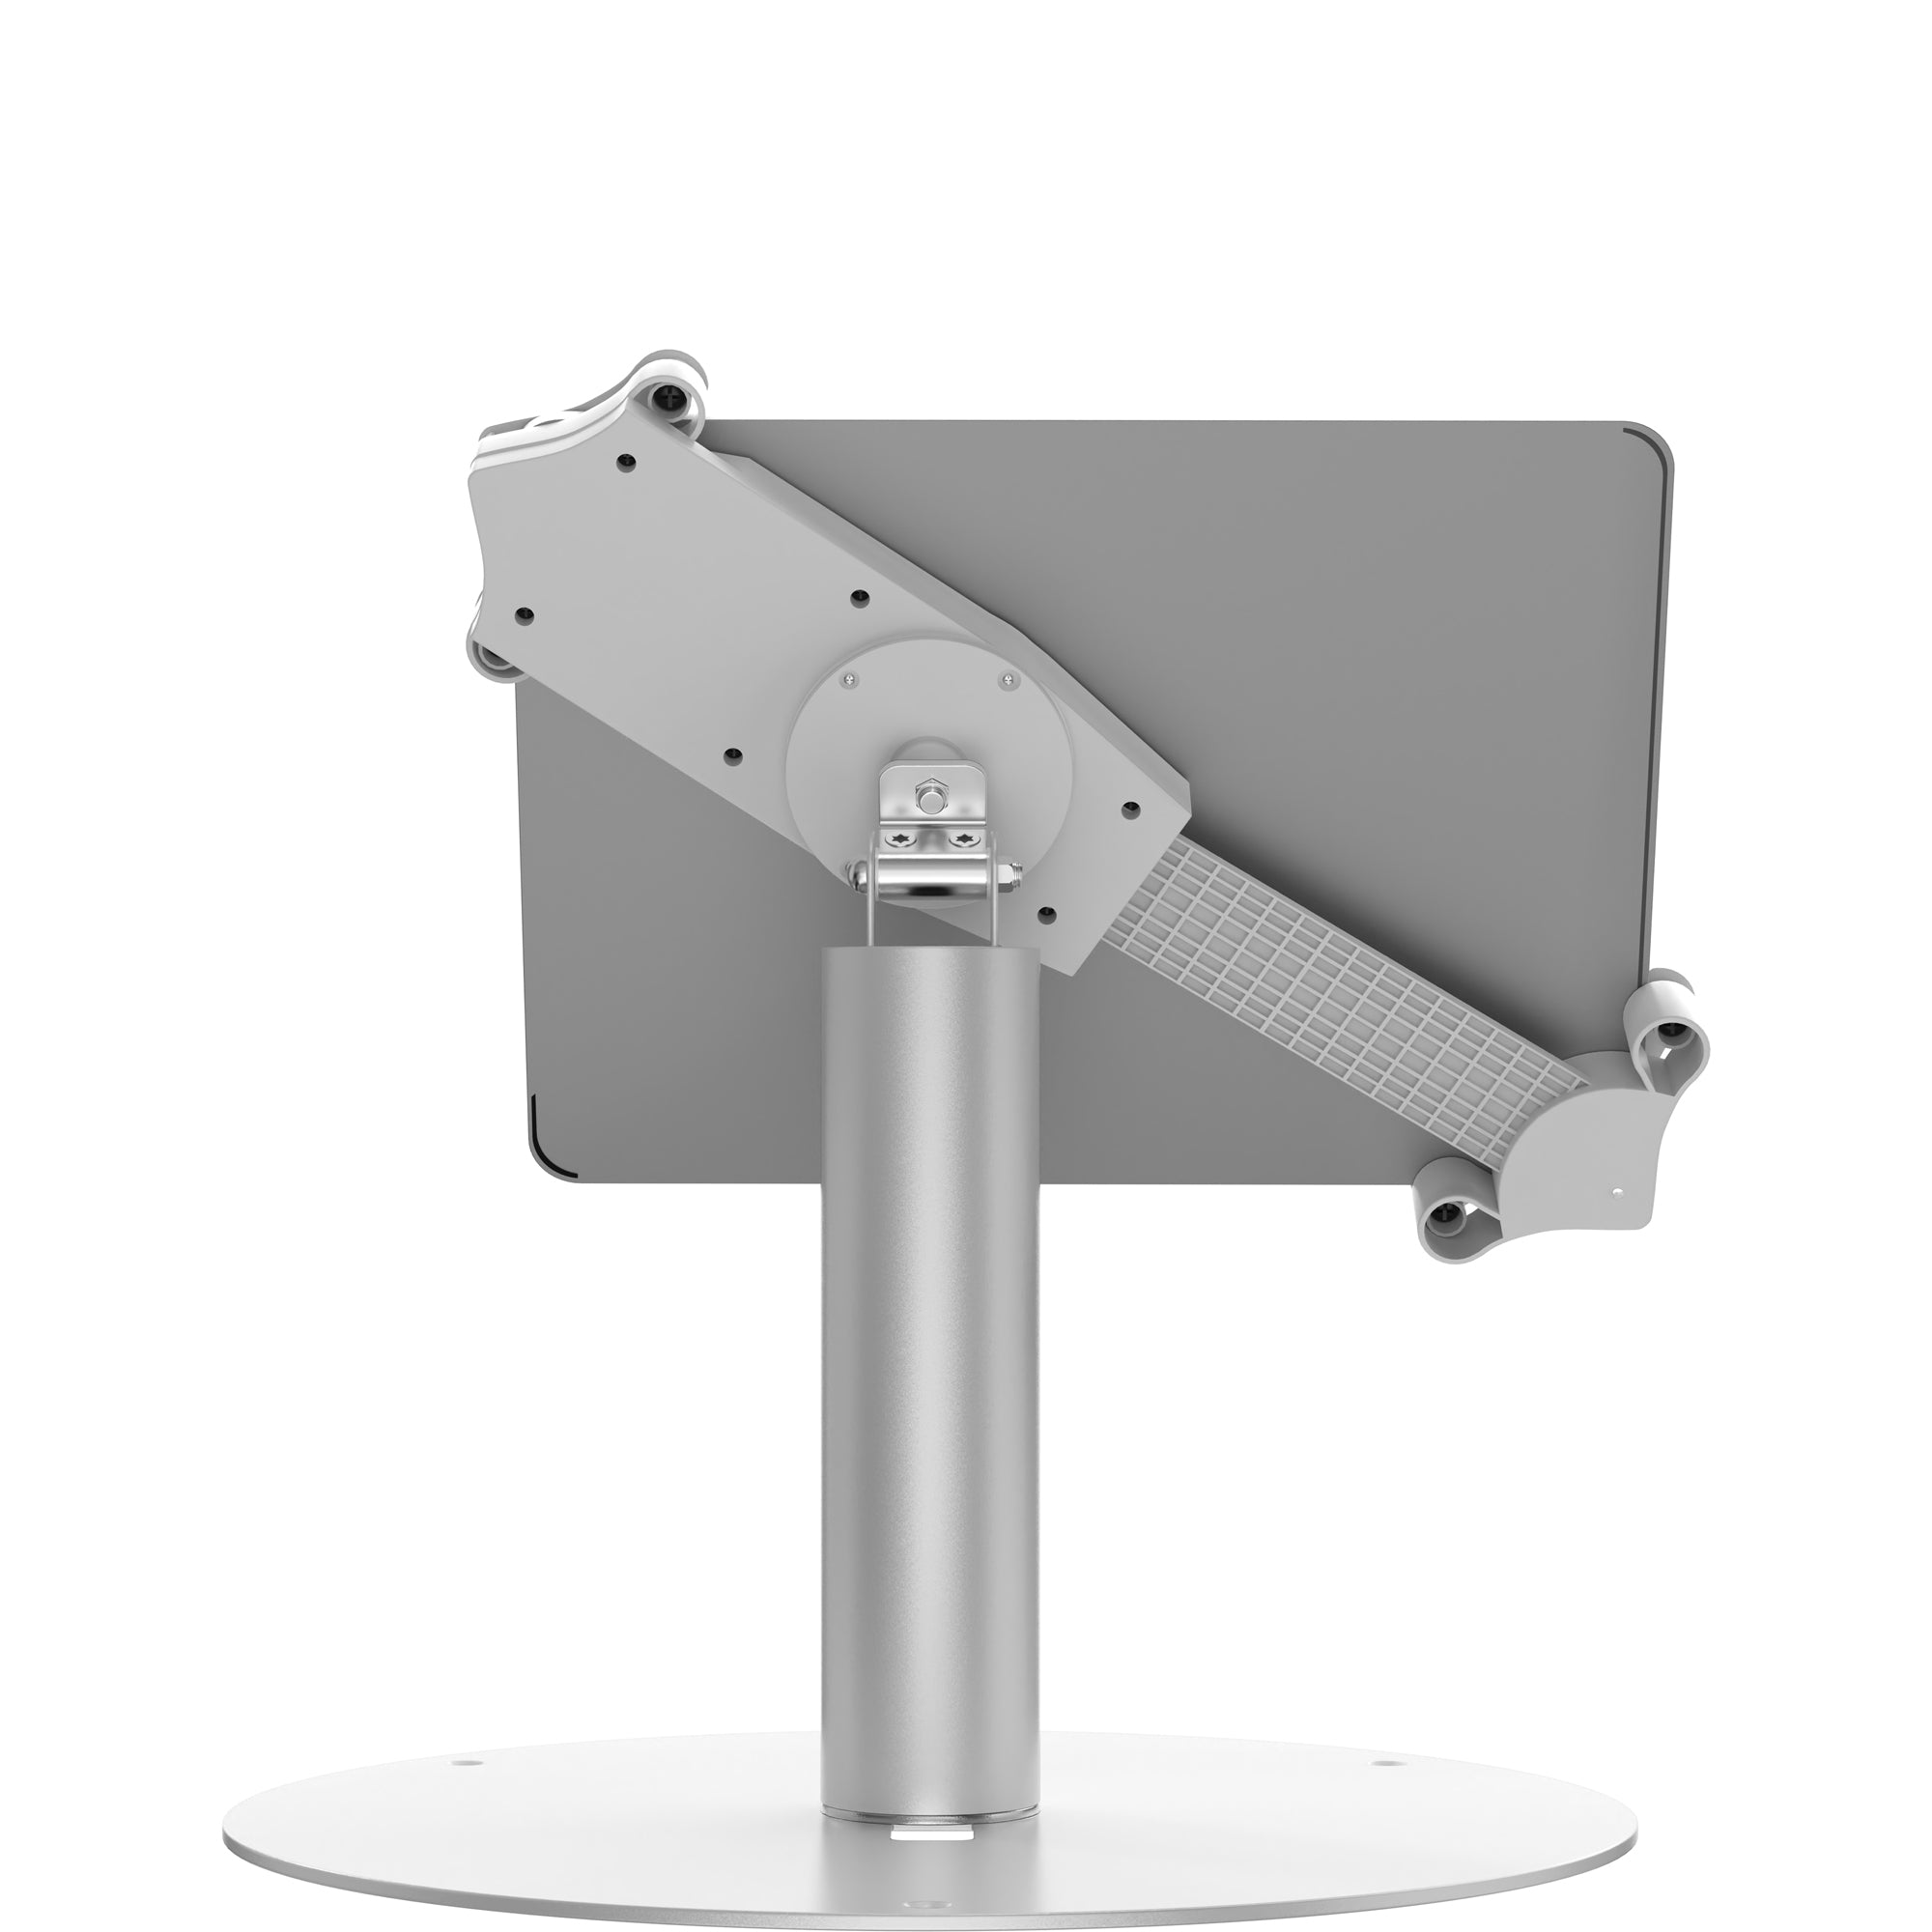 Universal Grip Kiosk Stand for Tablets